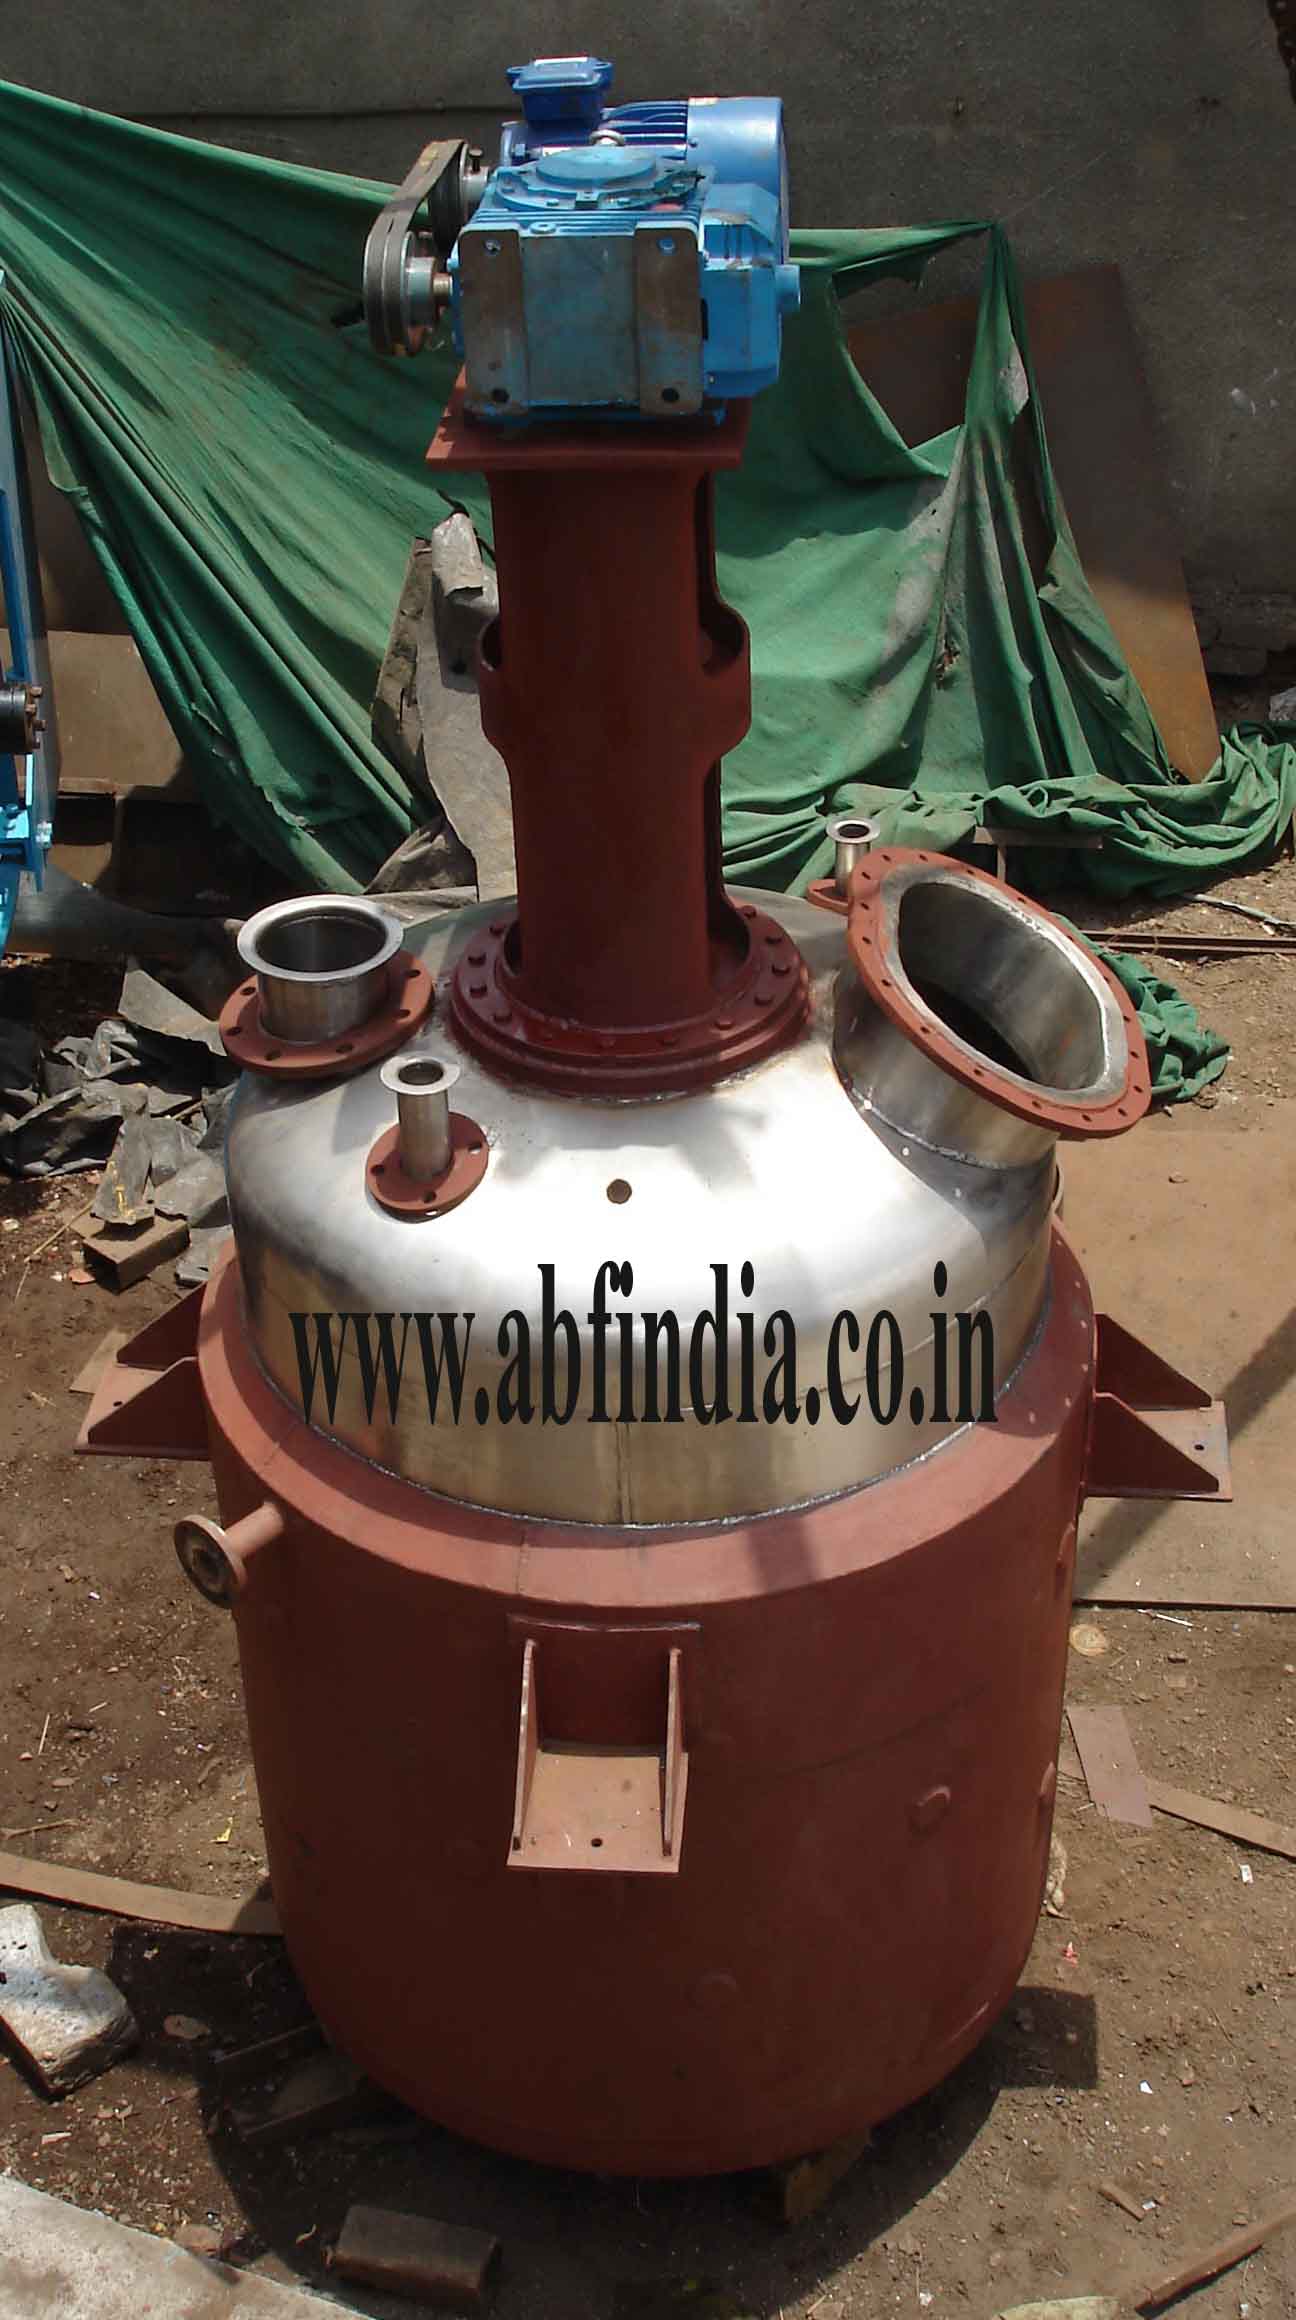 Jacketed Reaction Vessel, Jacketed Stainless Steel Reaction Vessel, Limpet Coil Vessel, Pressure Reaction Vessel, Pressure Vessel, Jacketed Vessel